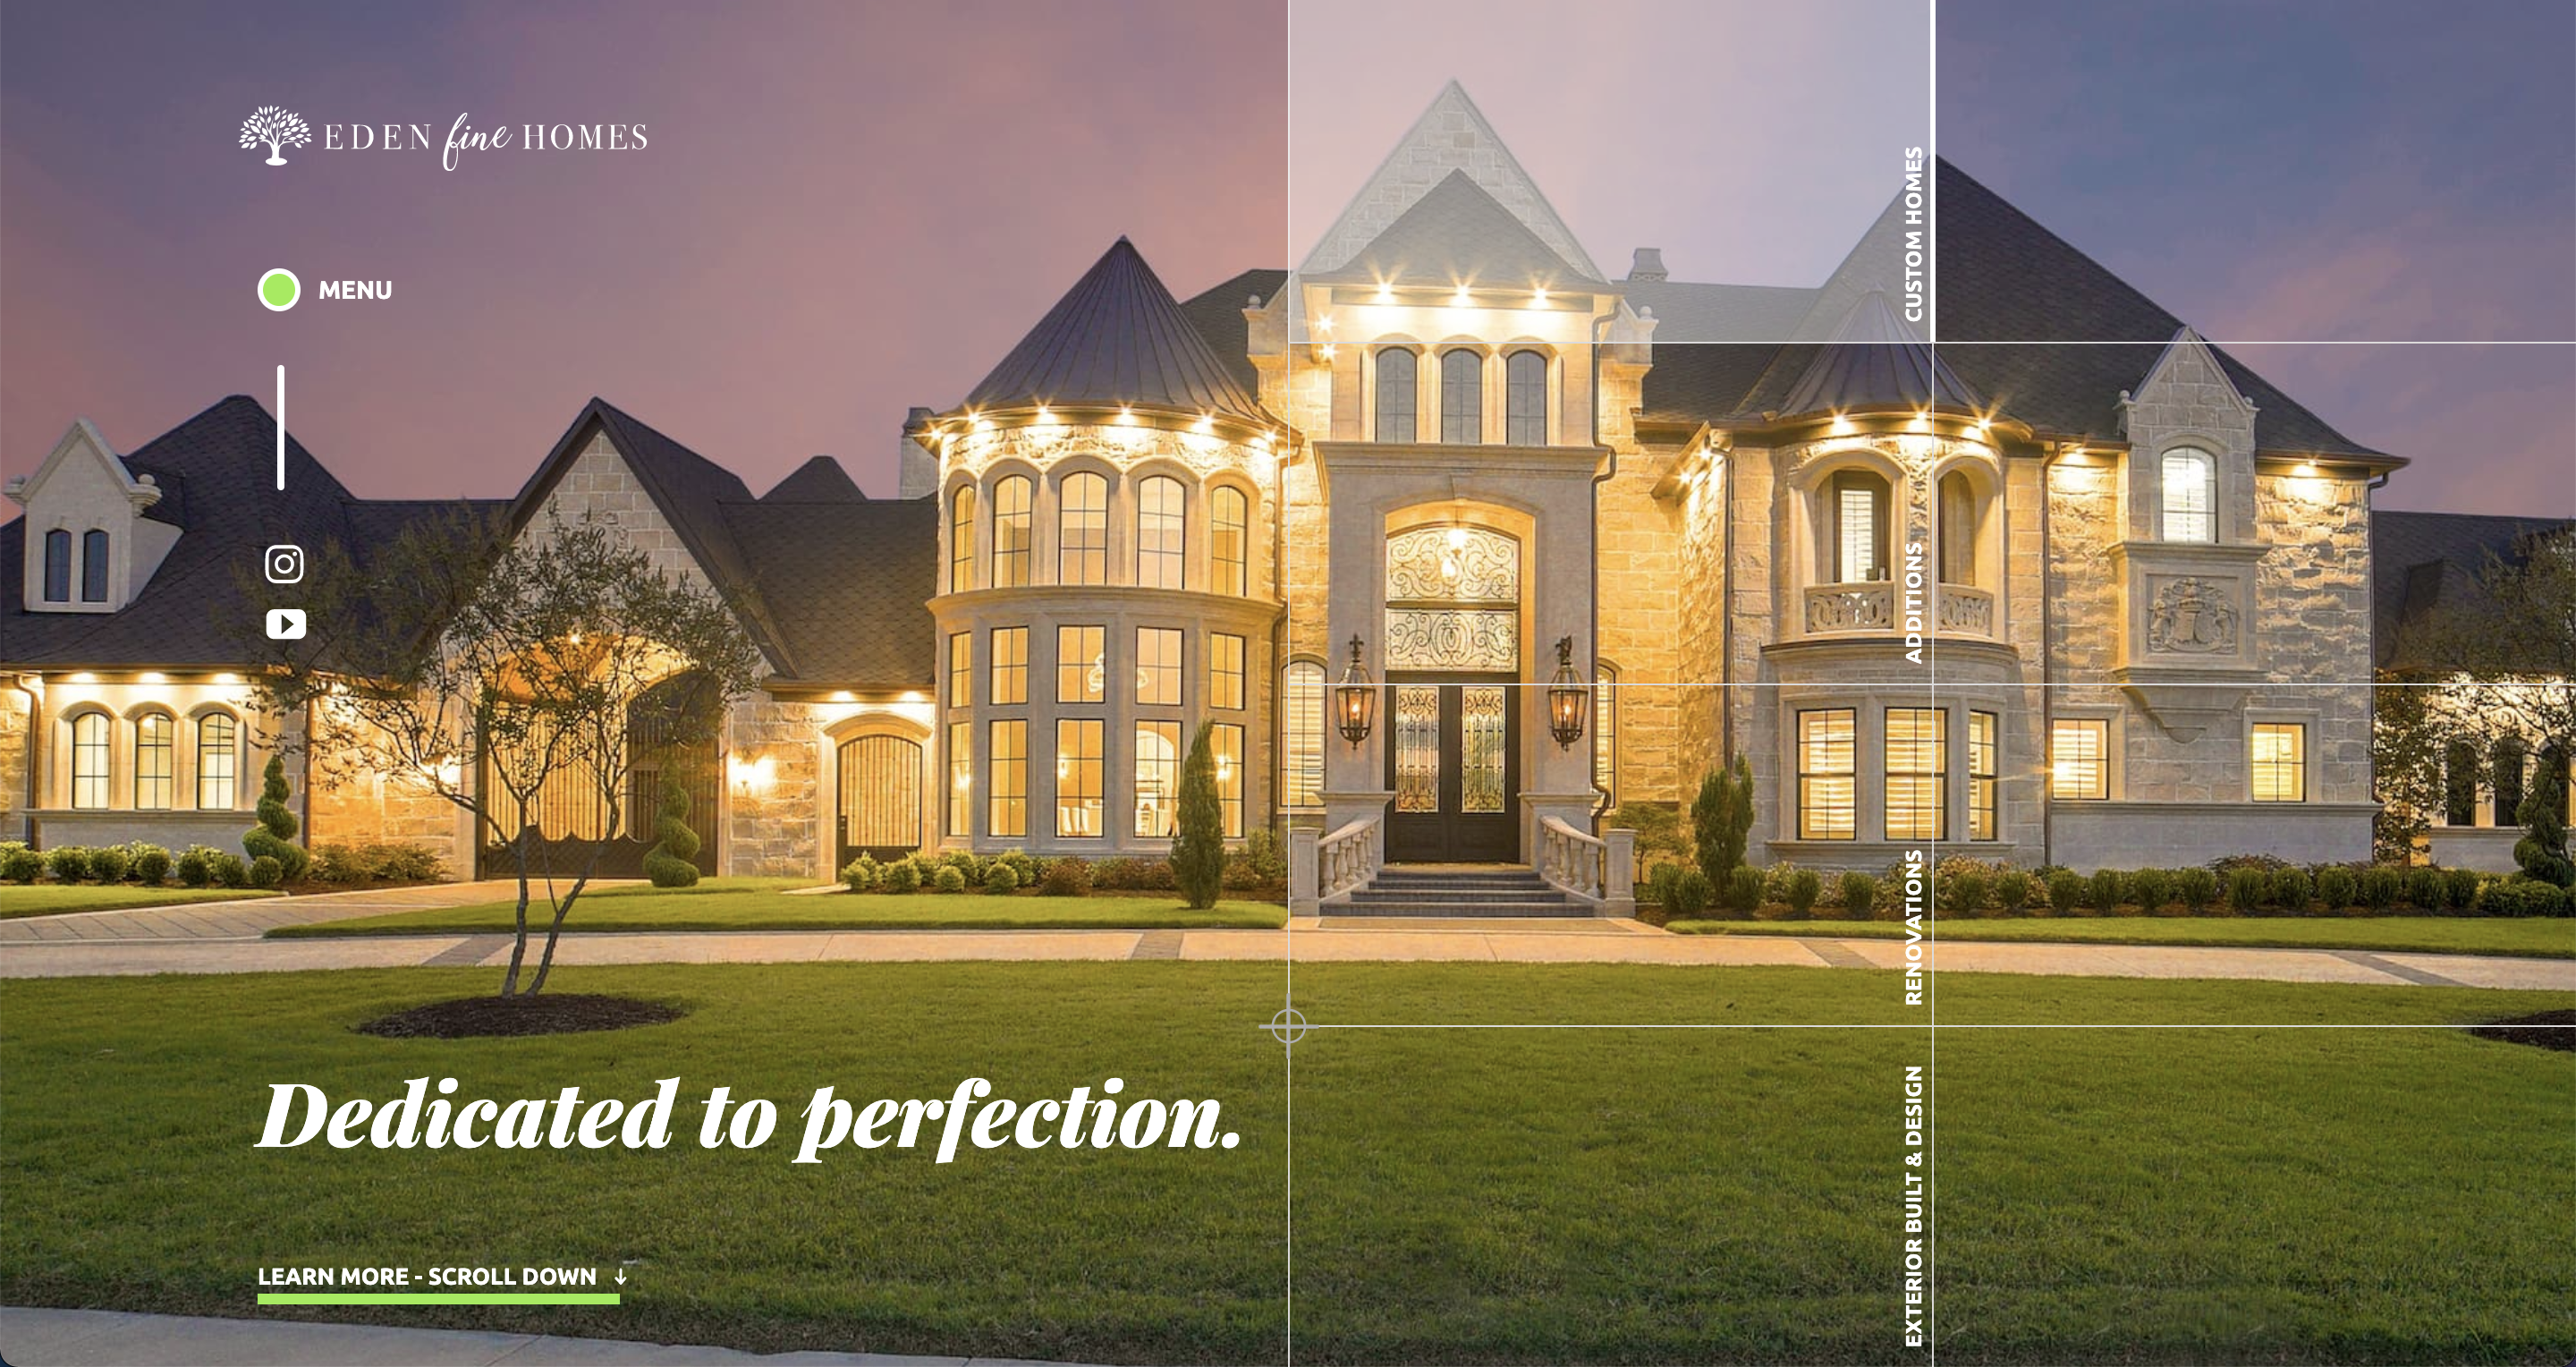 screenshot from the website Eden Fine Homes, showing a mansion